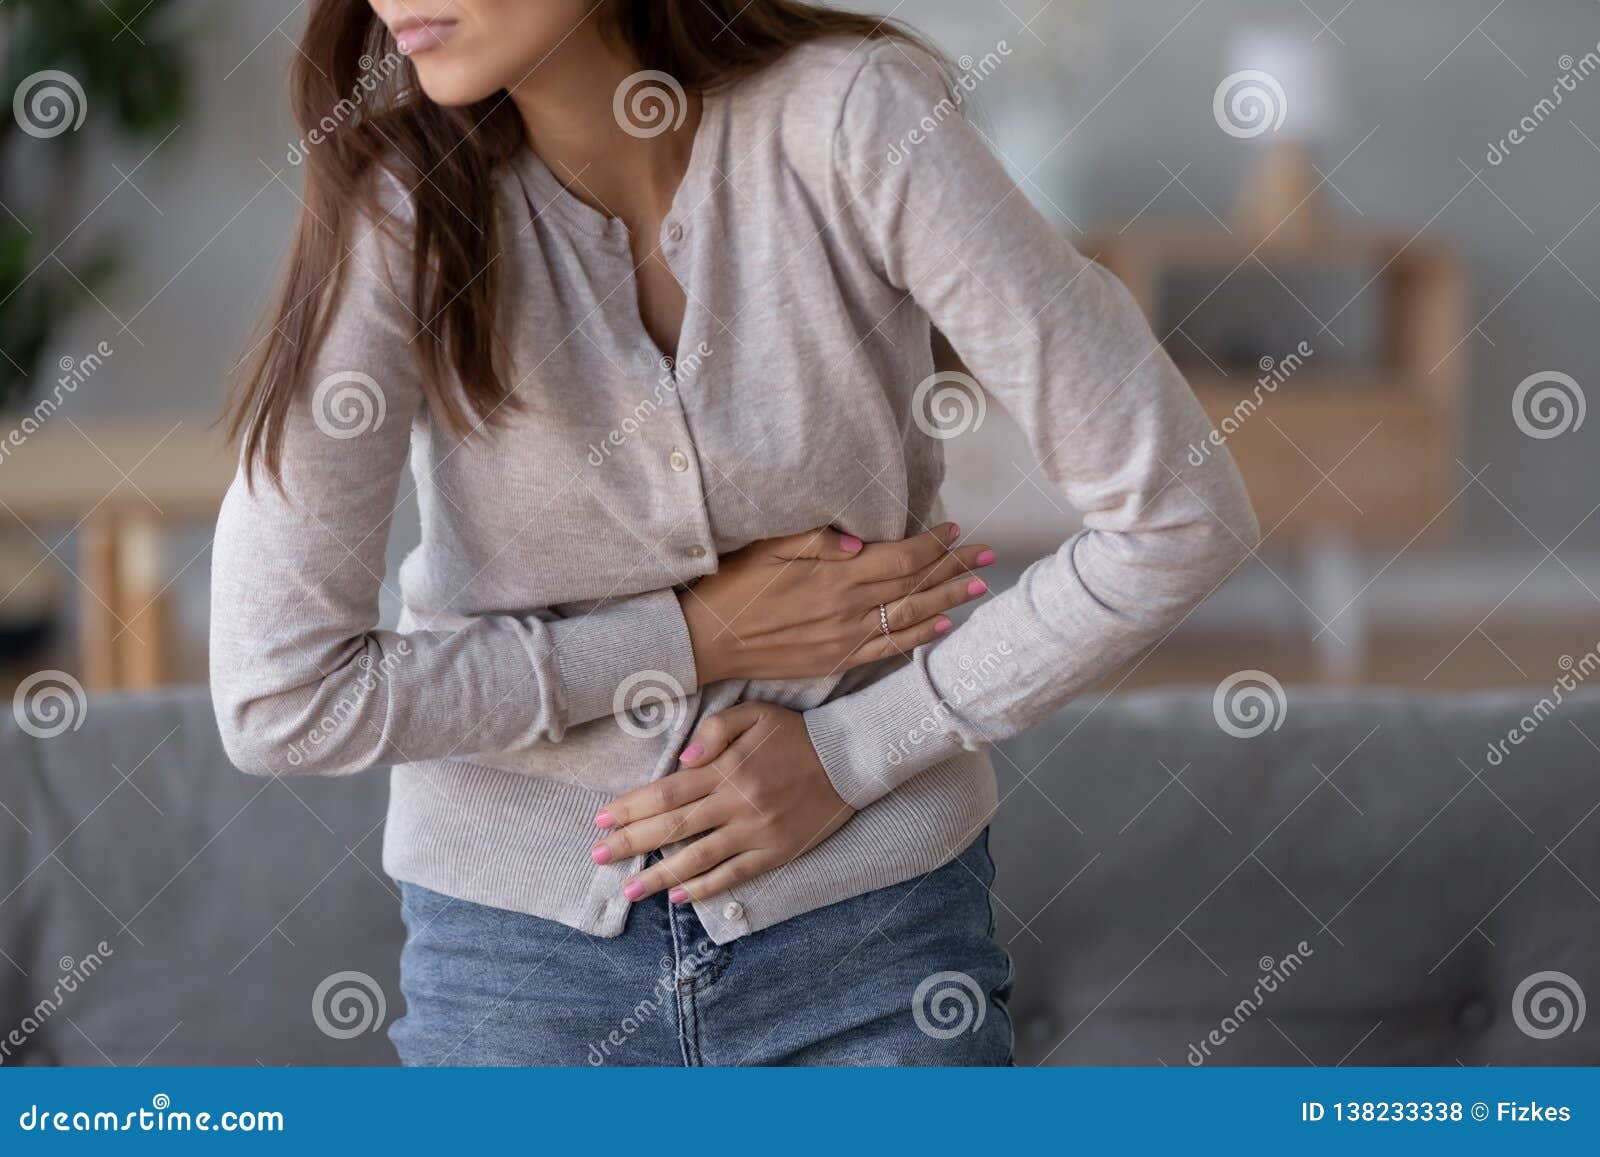 young sick woman standing holding belly suffering from stomach pain